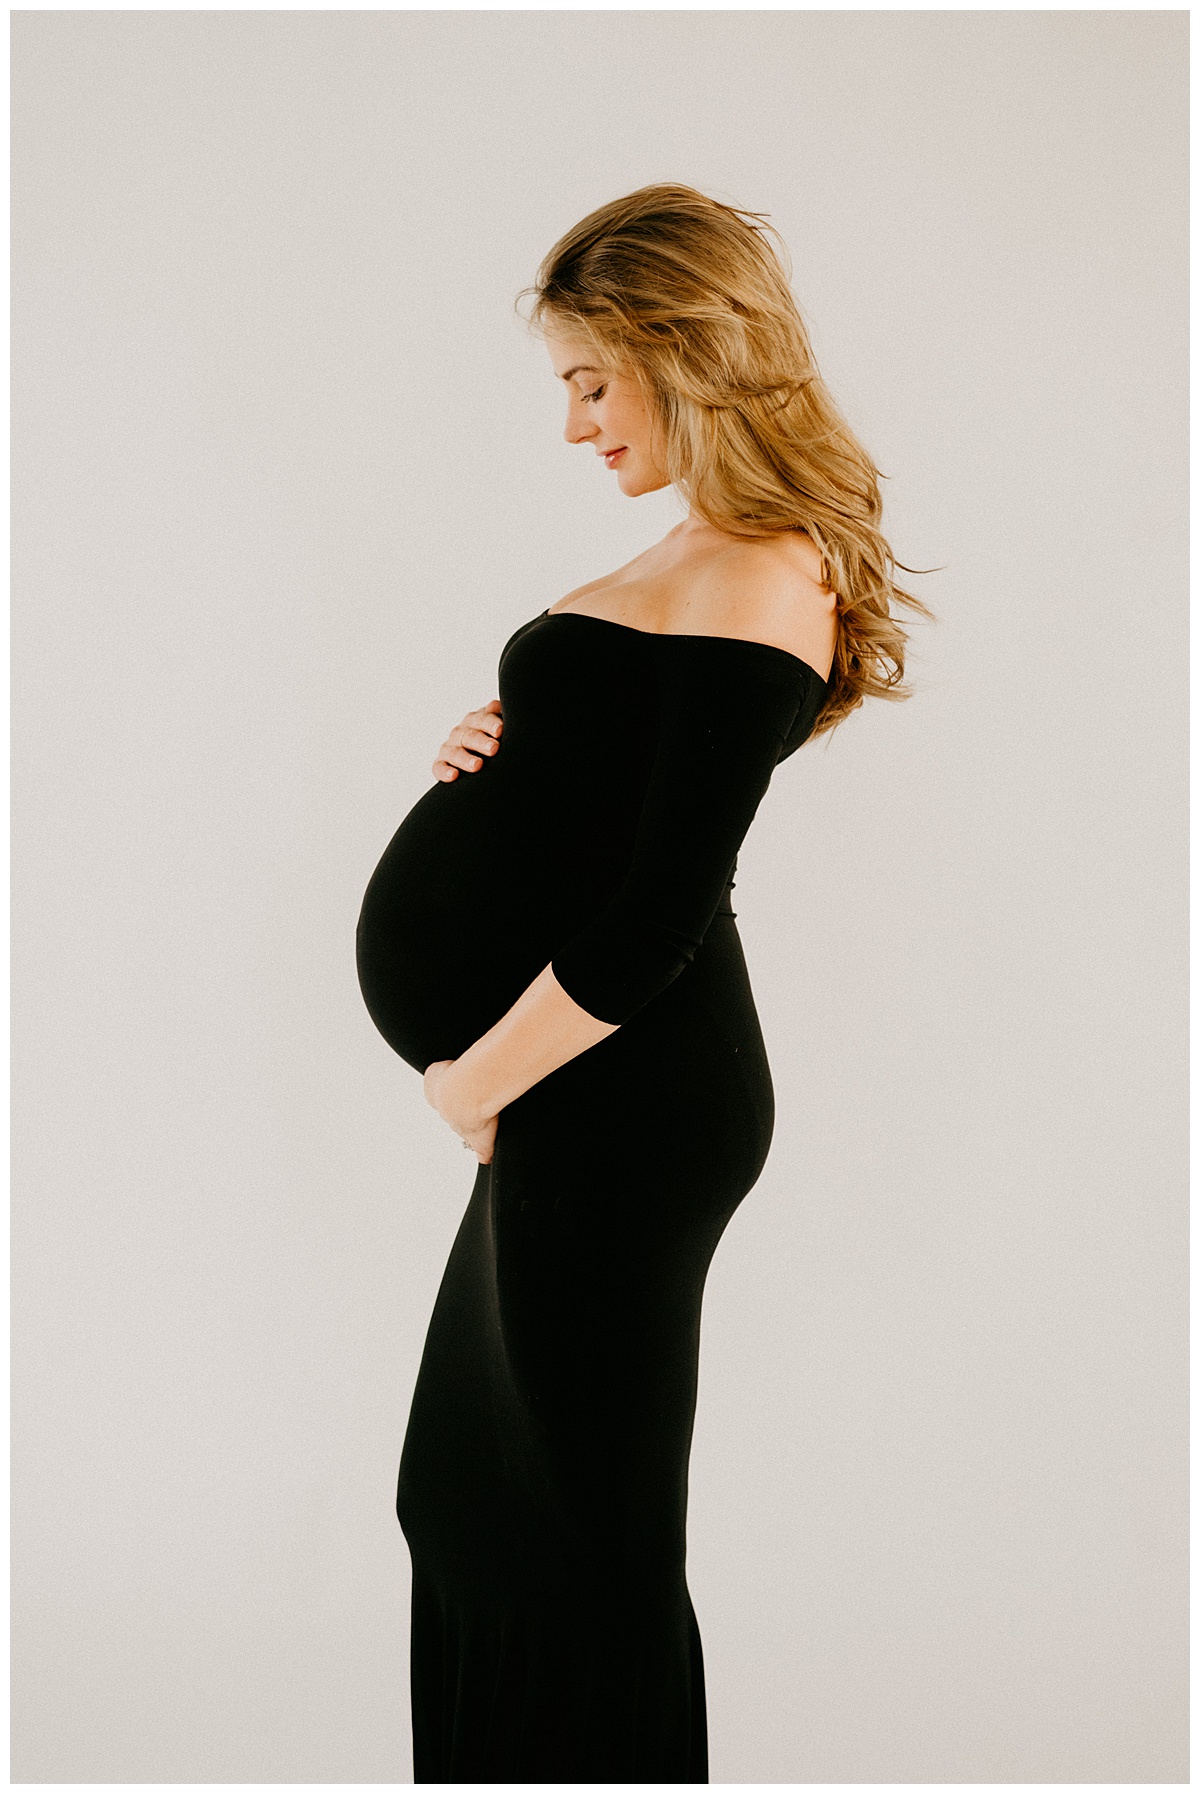 What to Wear for a Studio Maternity Photoshoot? - Studio 29 Photography Blog